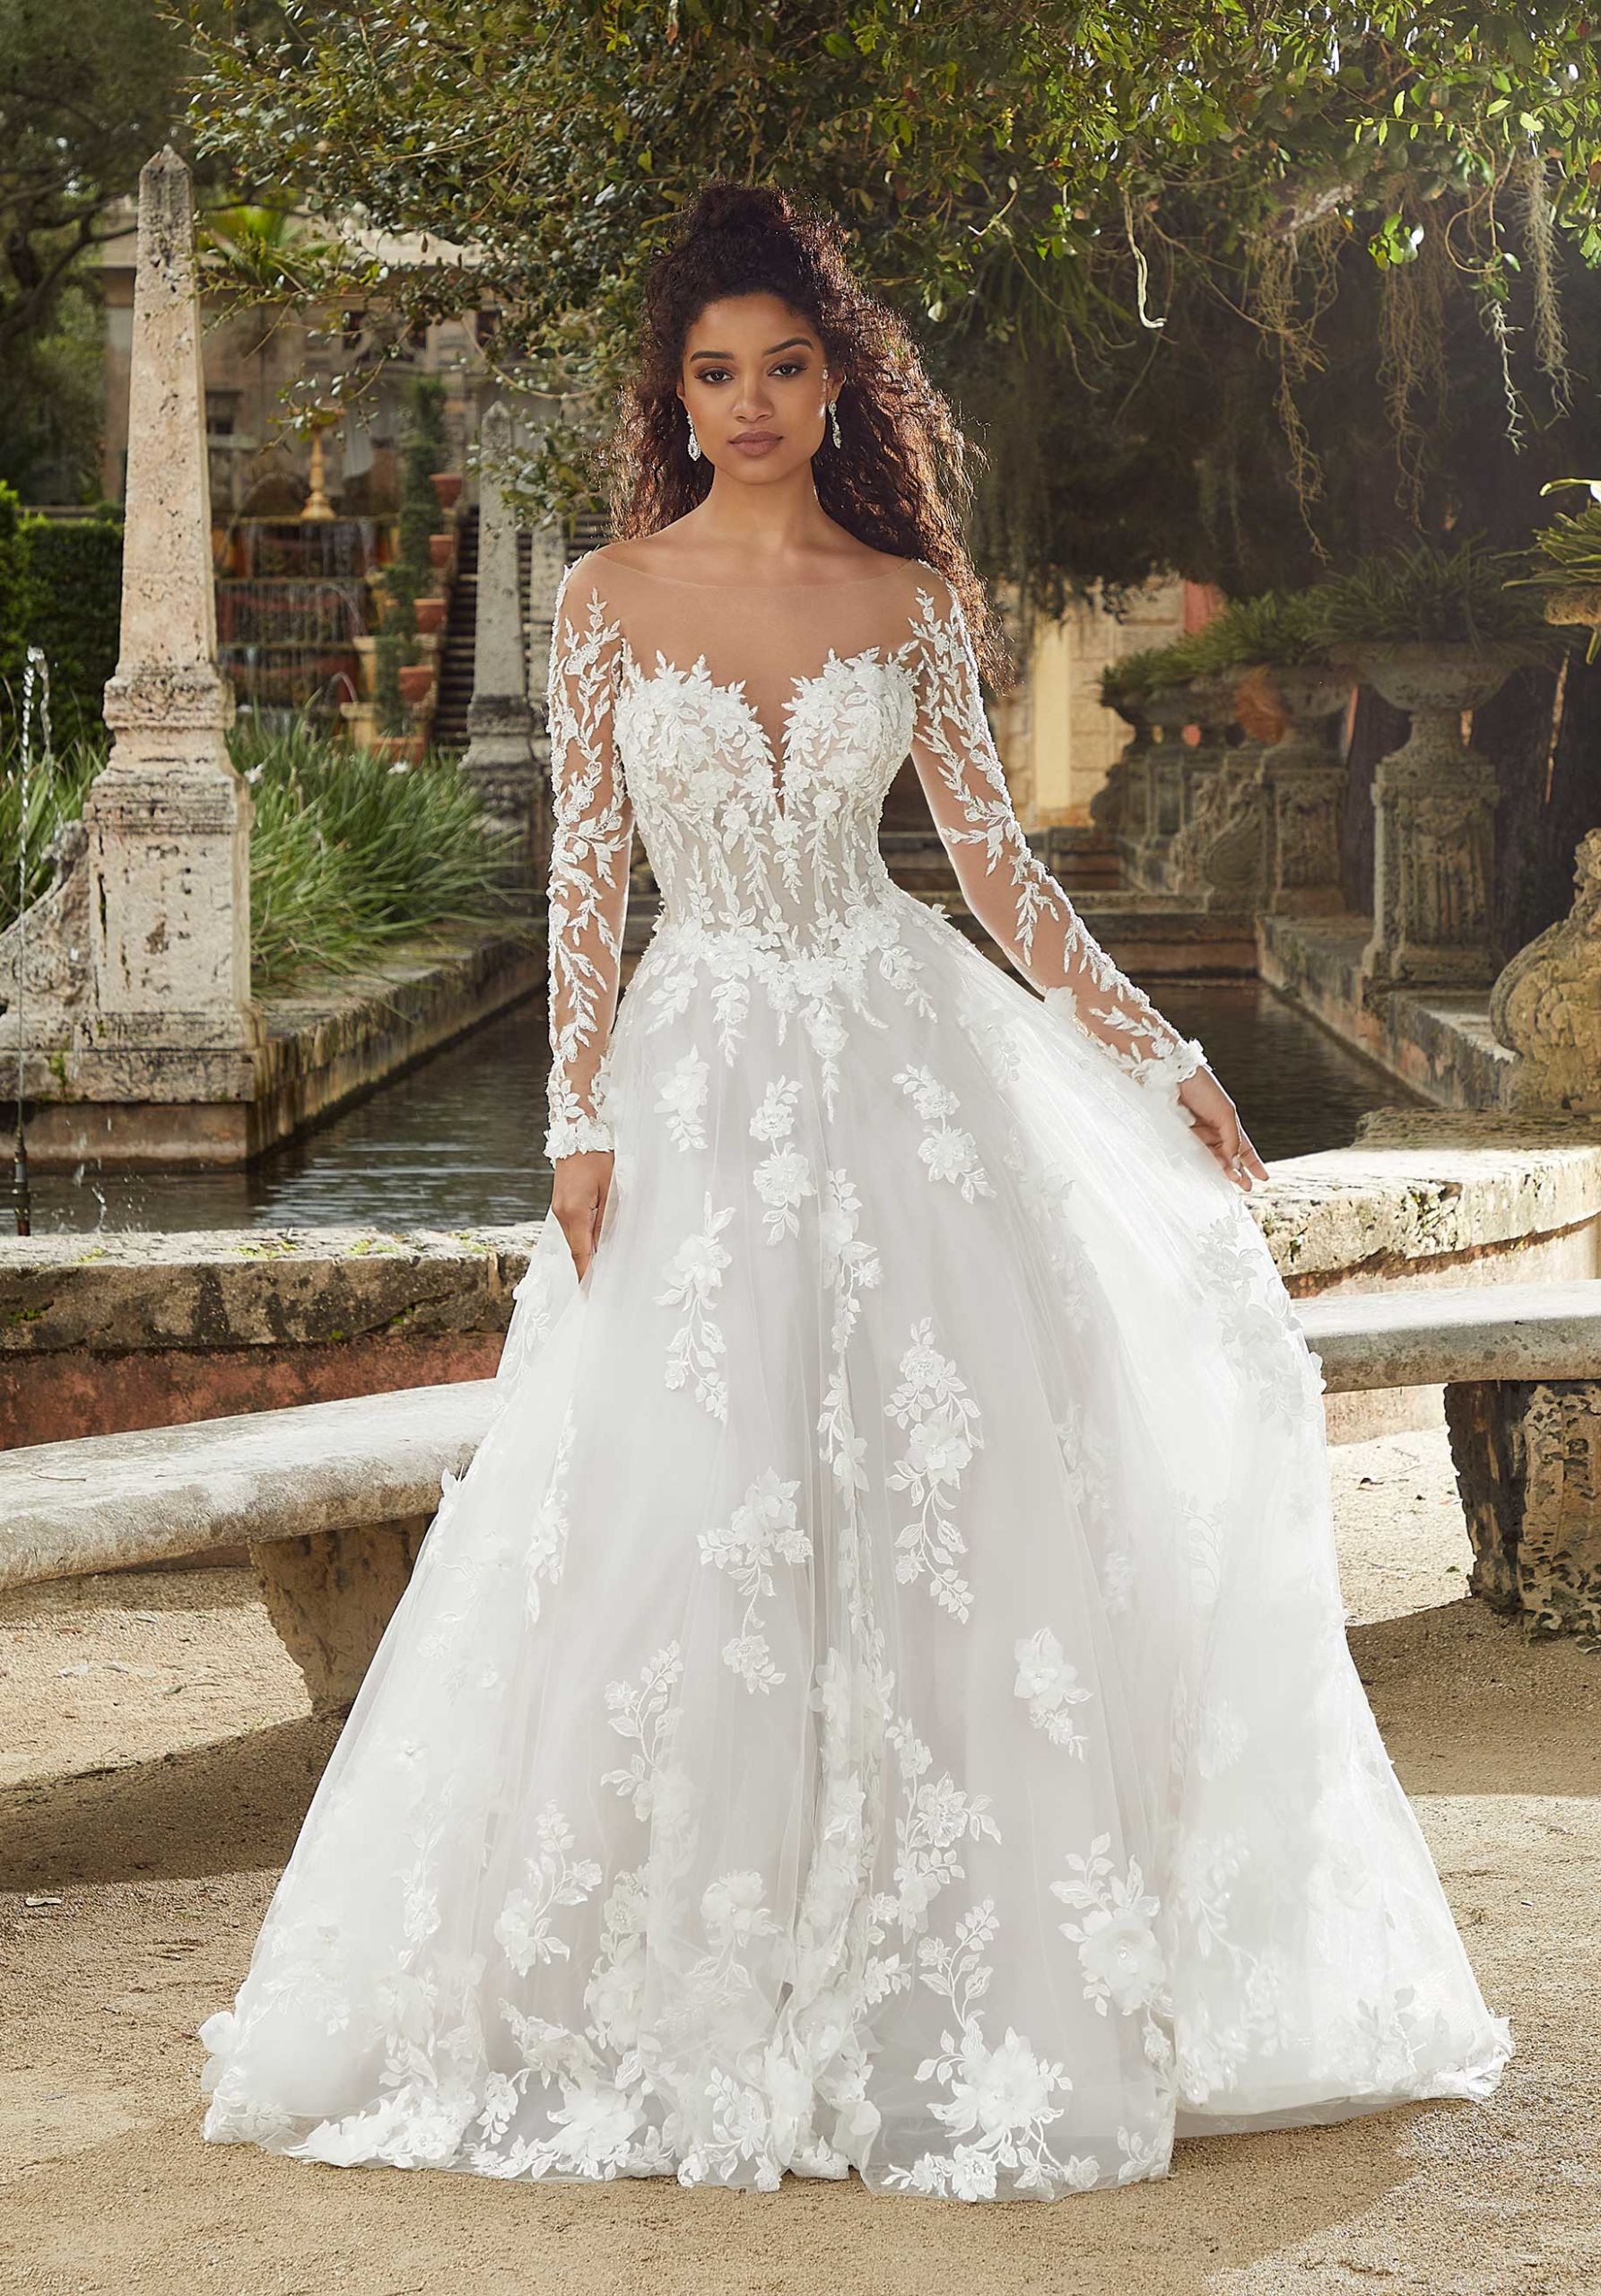 The Modest Bridal Collection Crystal